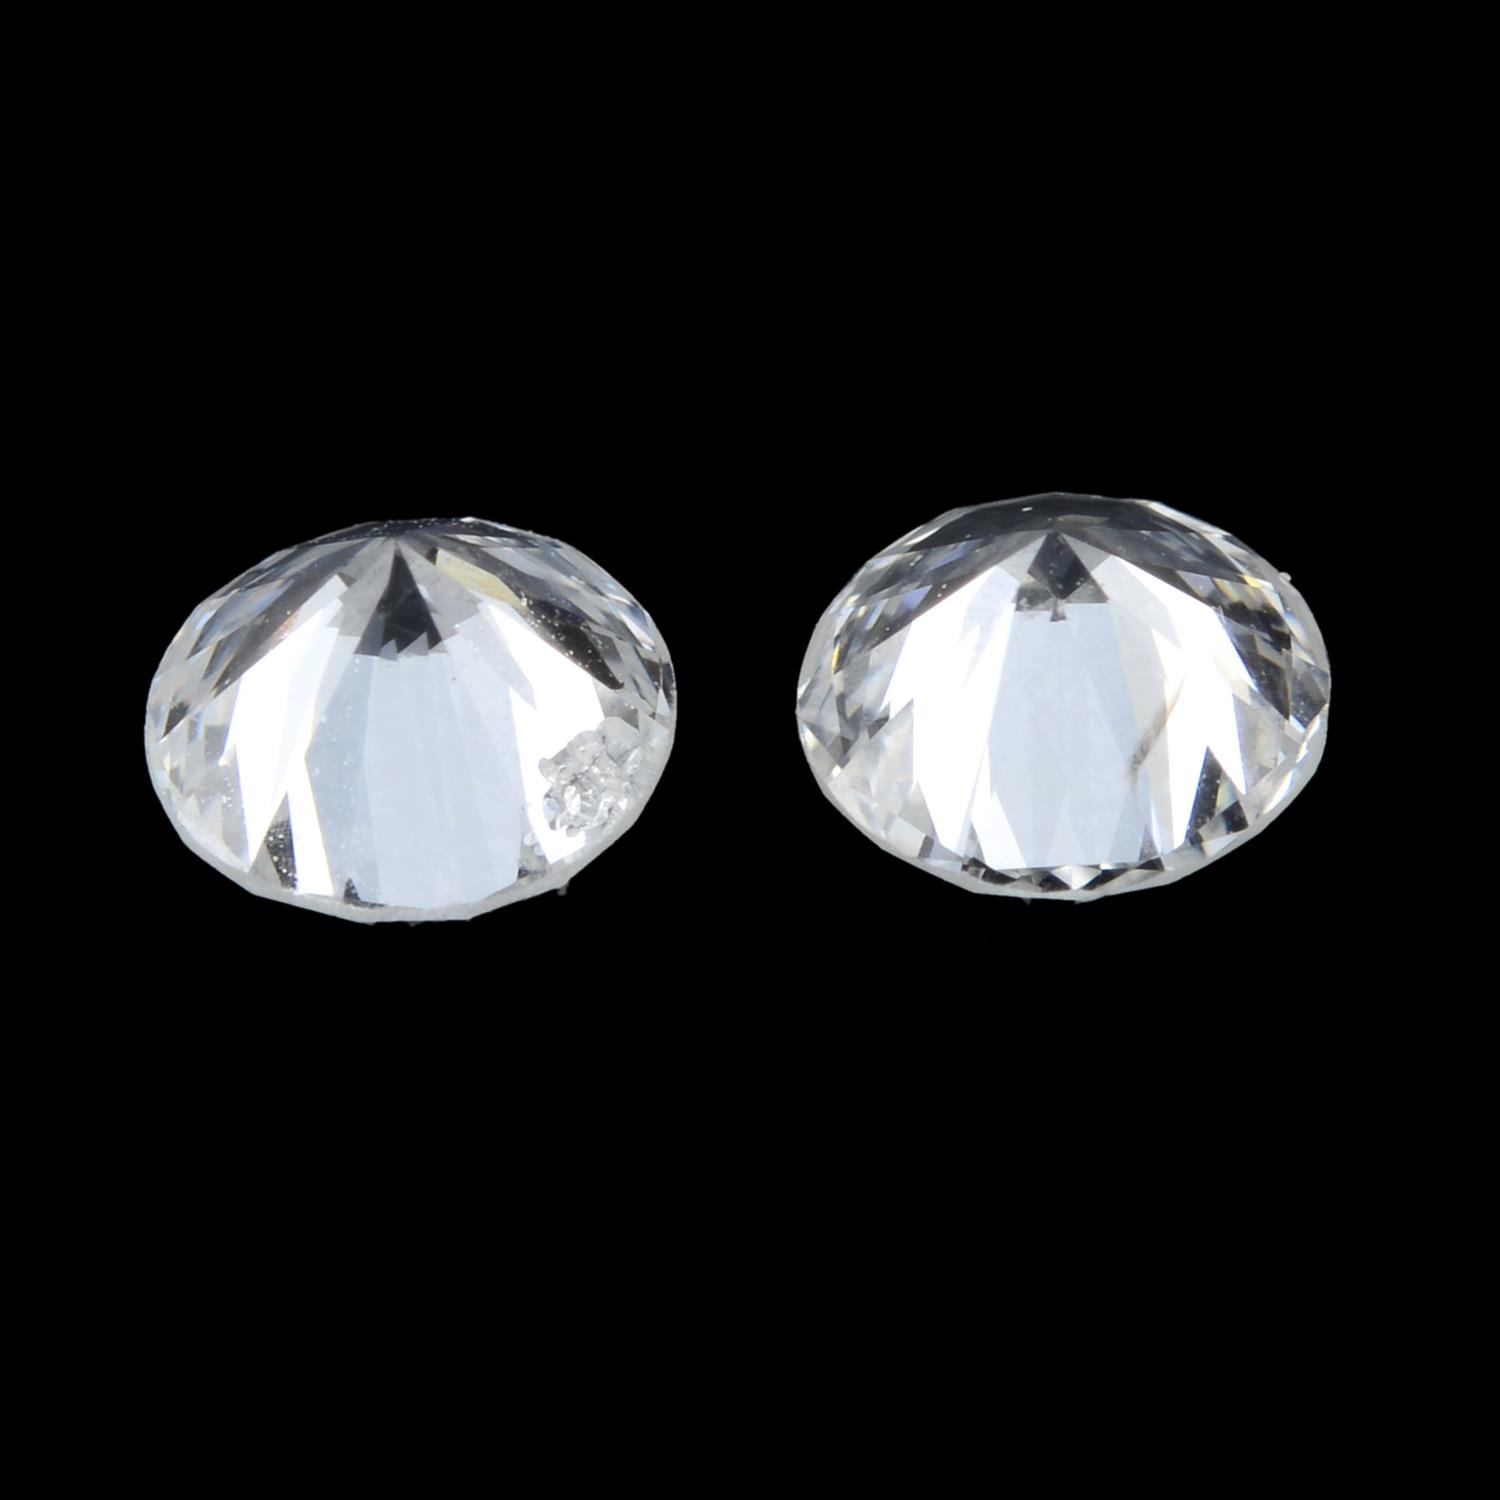 Pair of brilliant cut diamonds weighing 0.66ct - Image 2 of 2